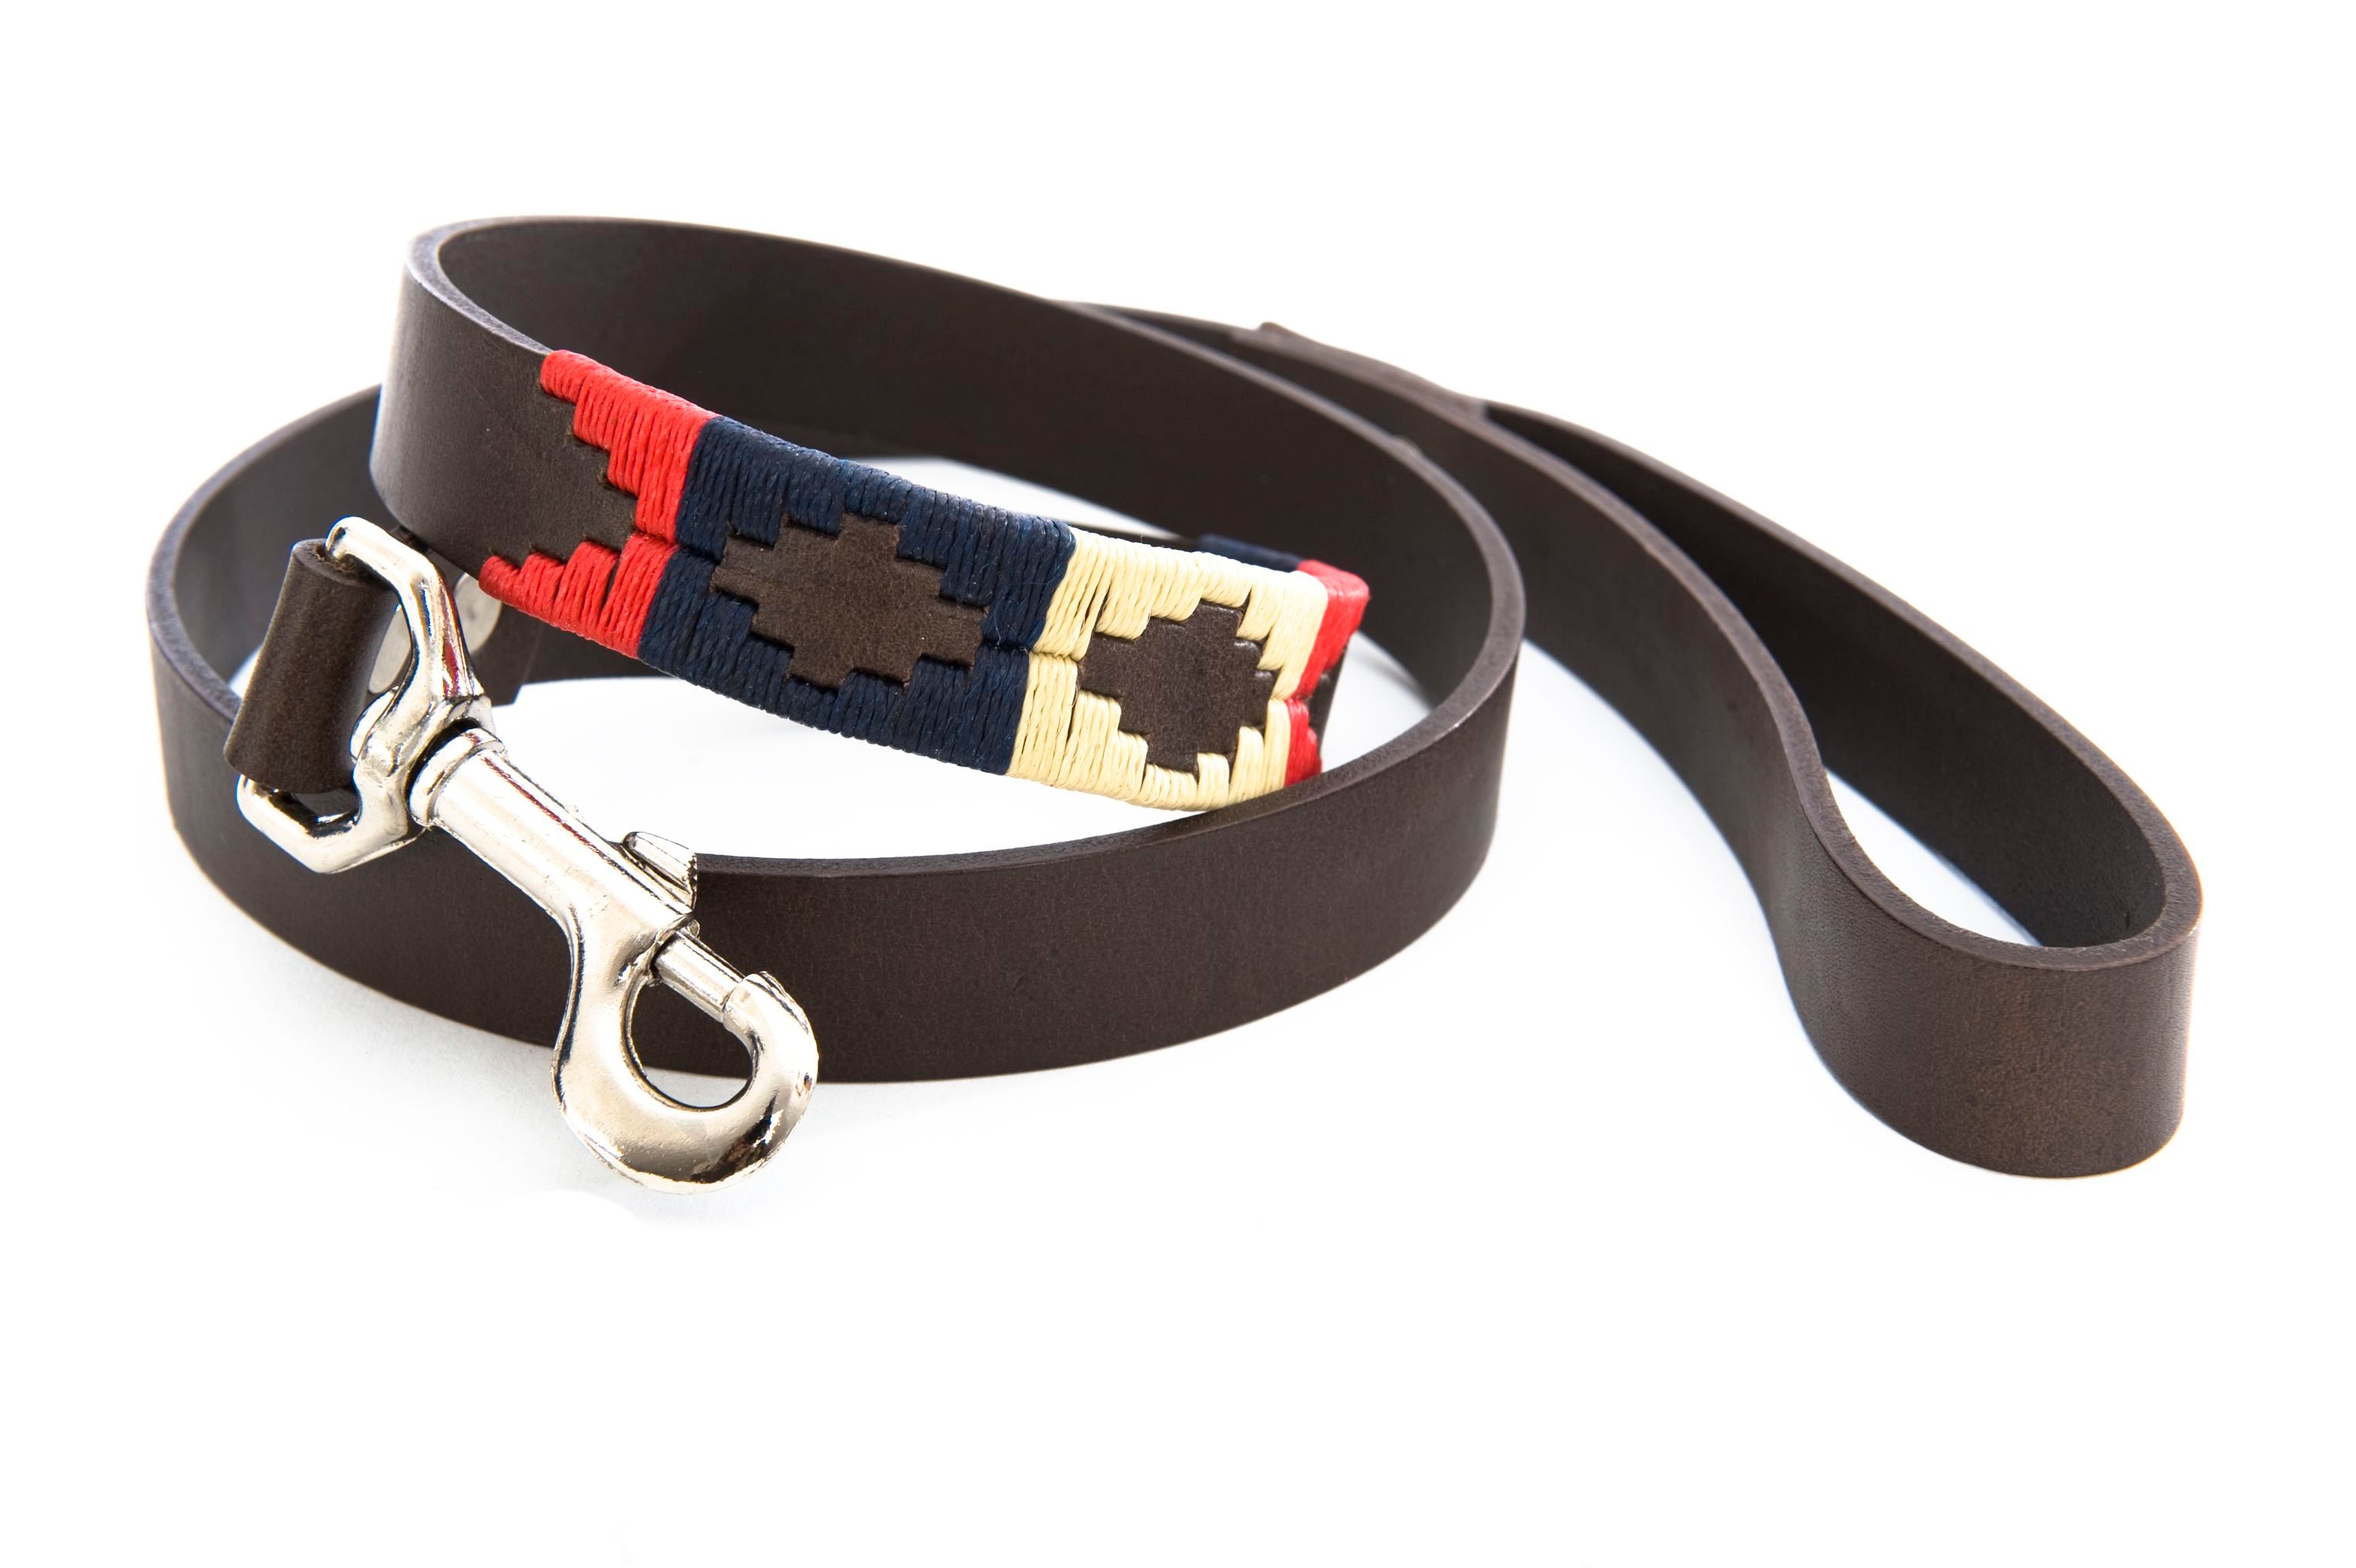 Polo Belt Style Dog Lead - Navy/Cream/Red